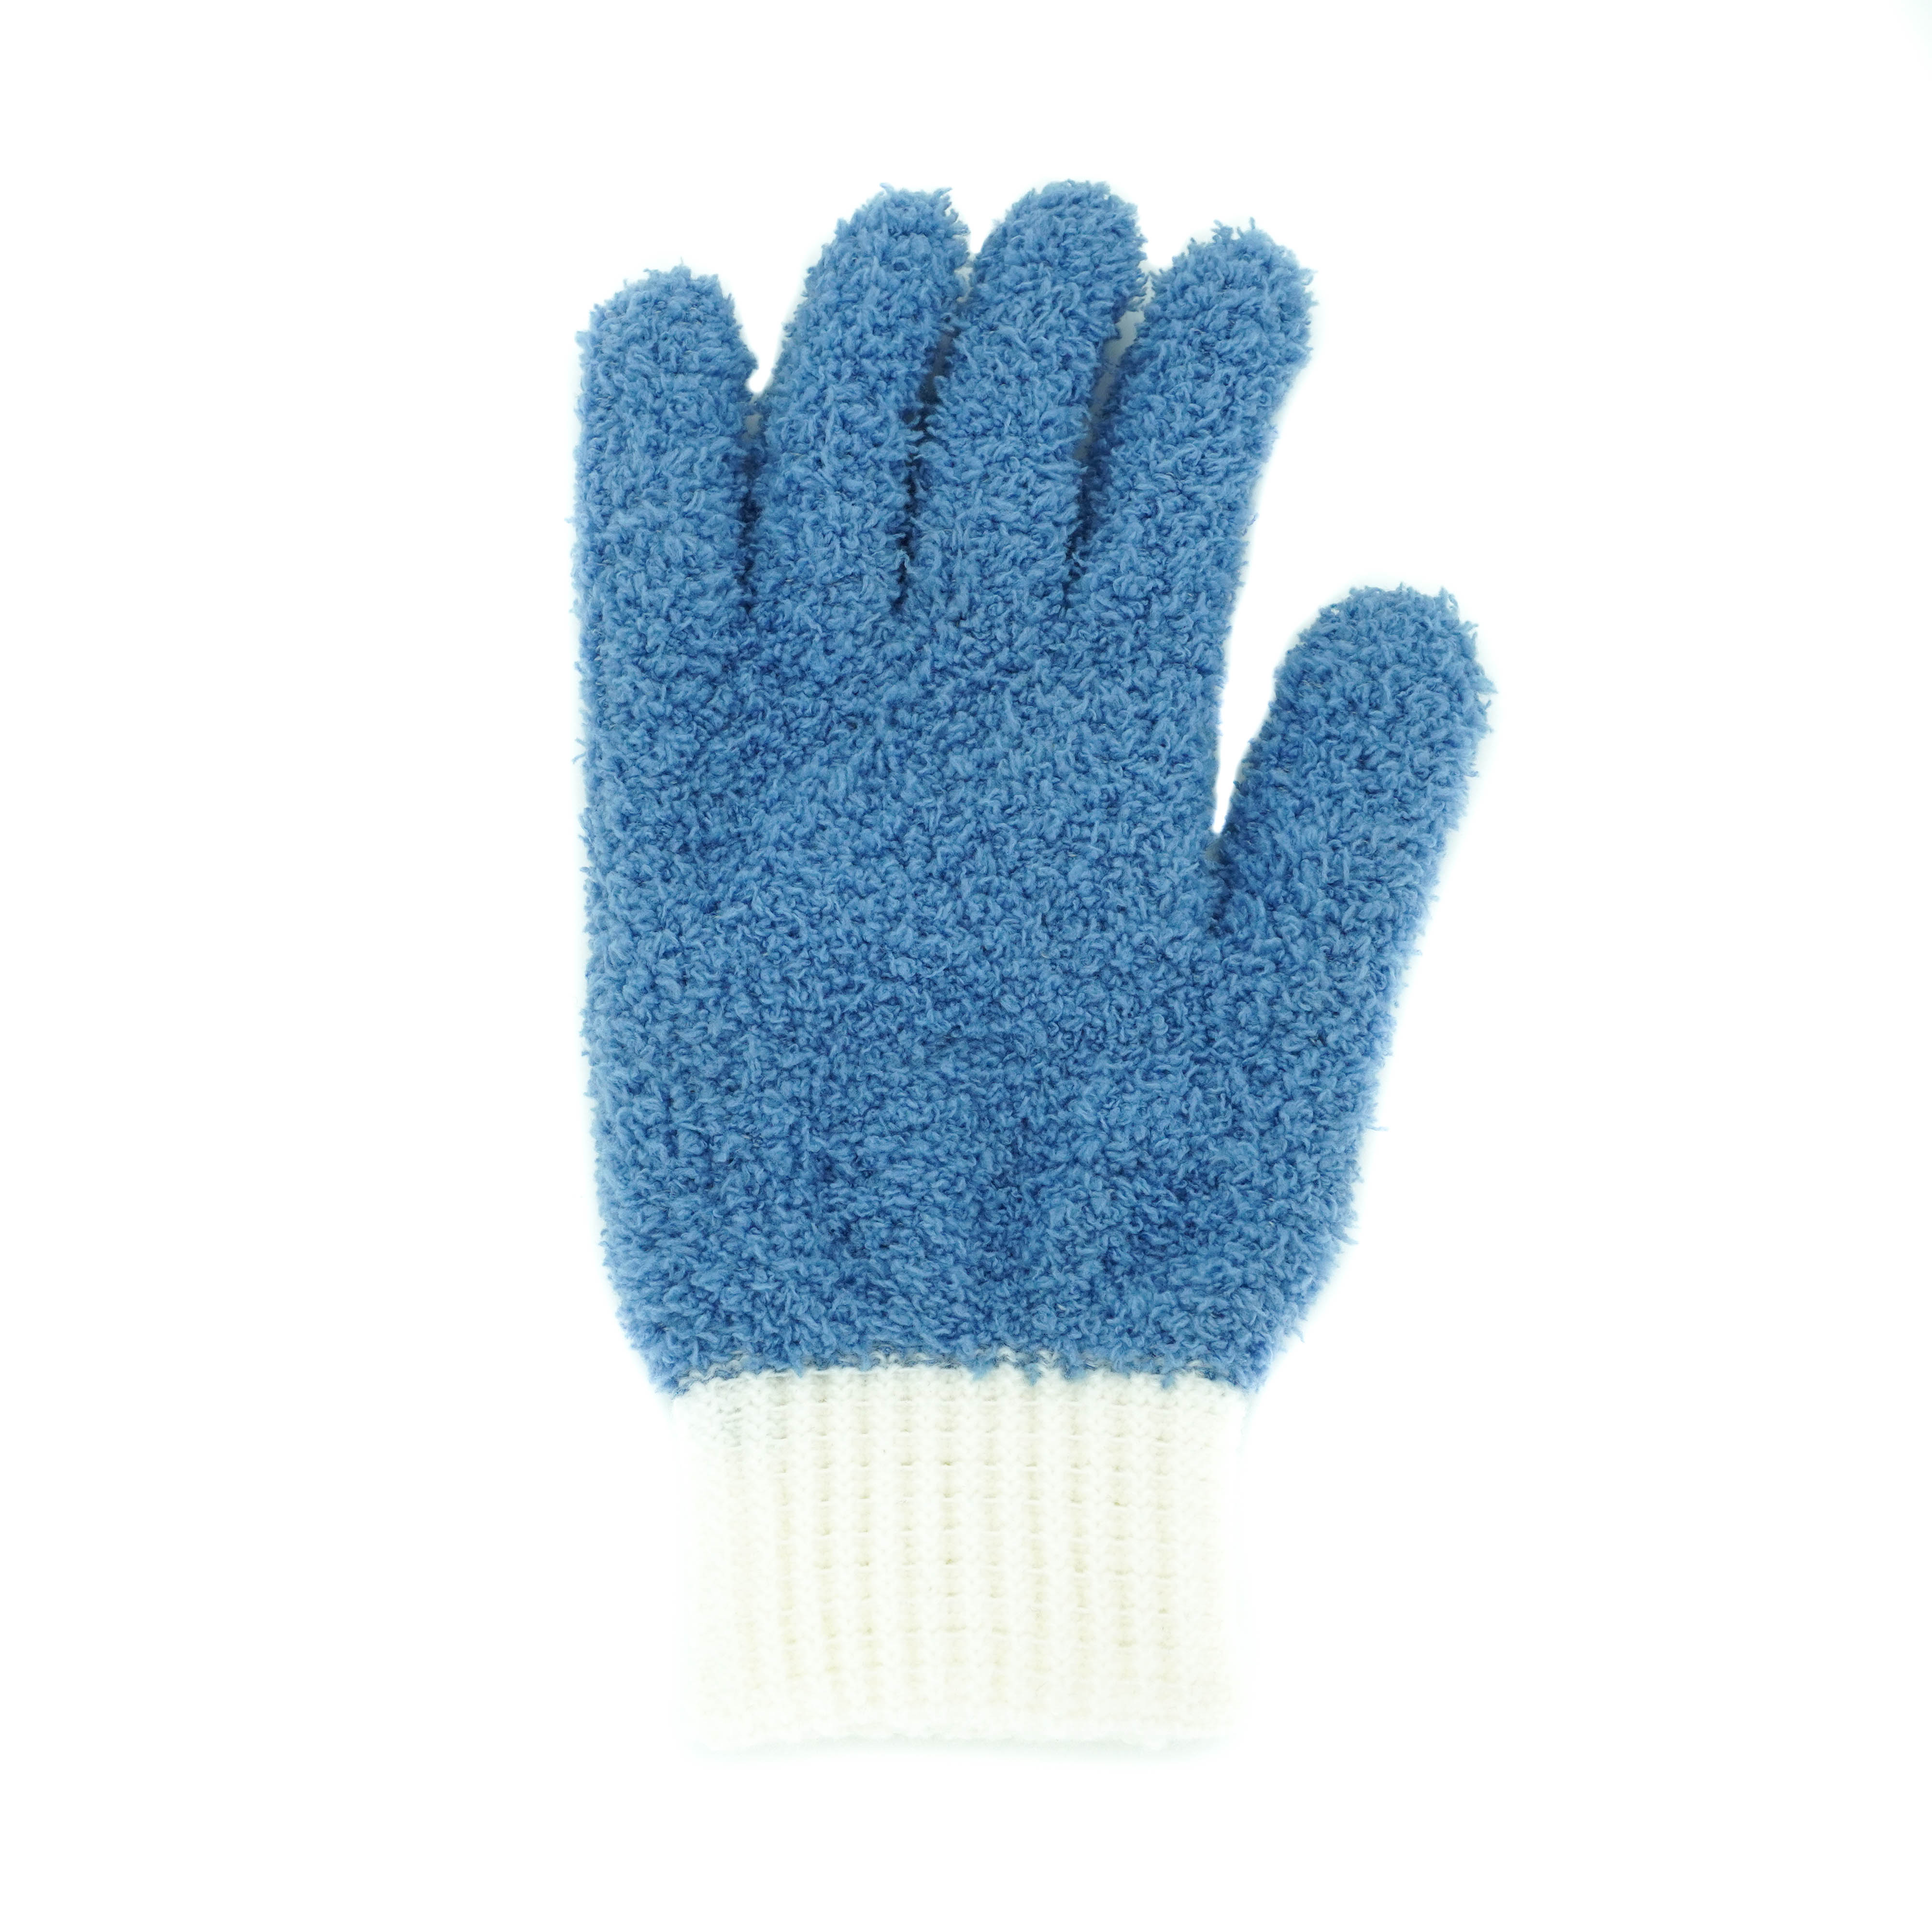 China wholesale Auto Wash Mitt - Microfiber Auto Dusting Cleaning Gloves for Cars and Trucks, Dust Cleaning Gloves for House Cleaning, Perfect to Clean Mirrors, Lamps and Blinds – Weavers